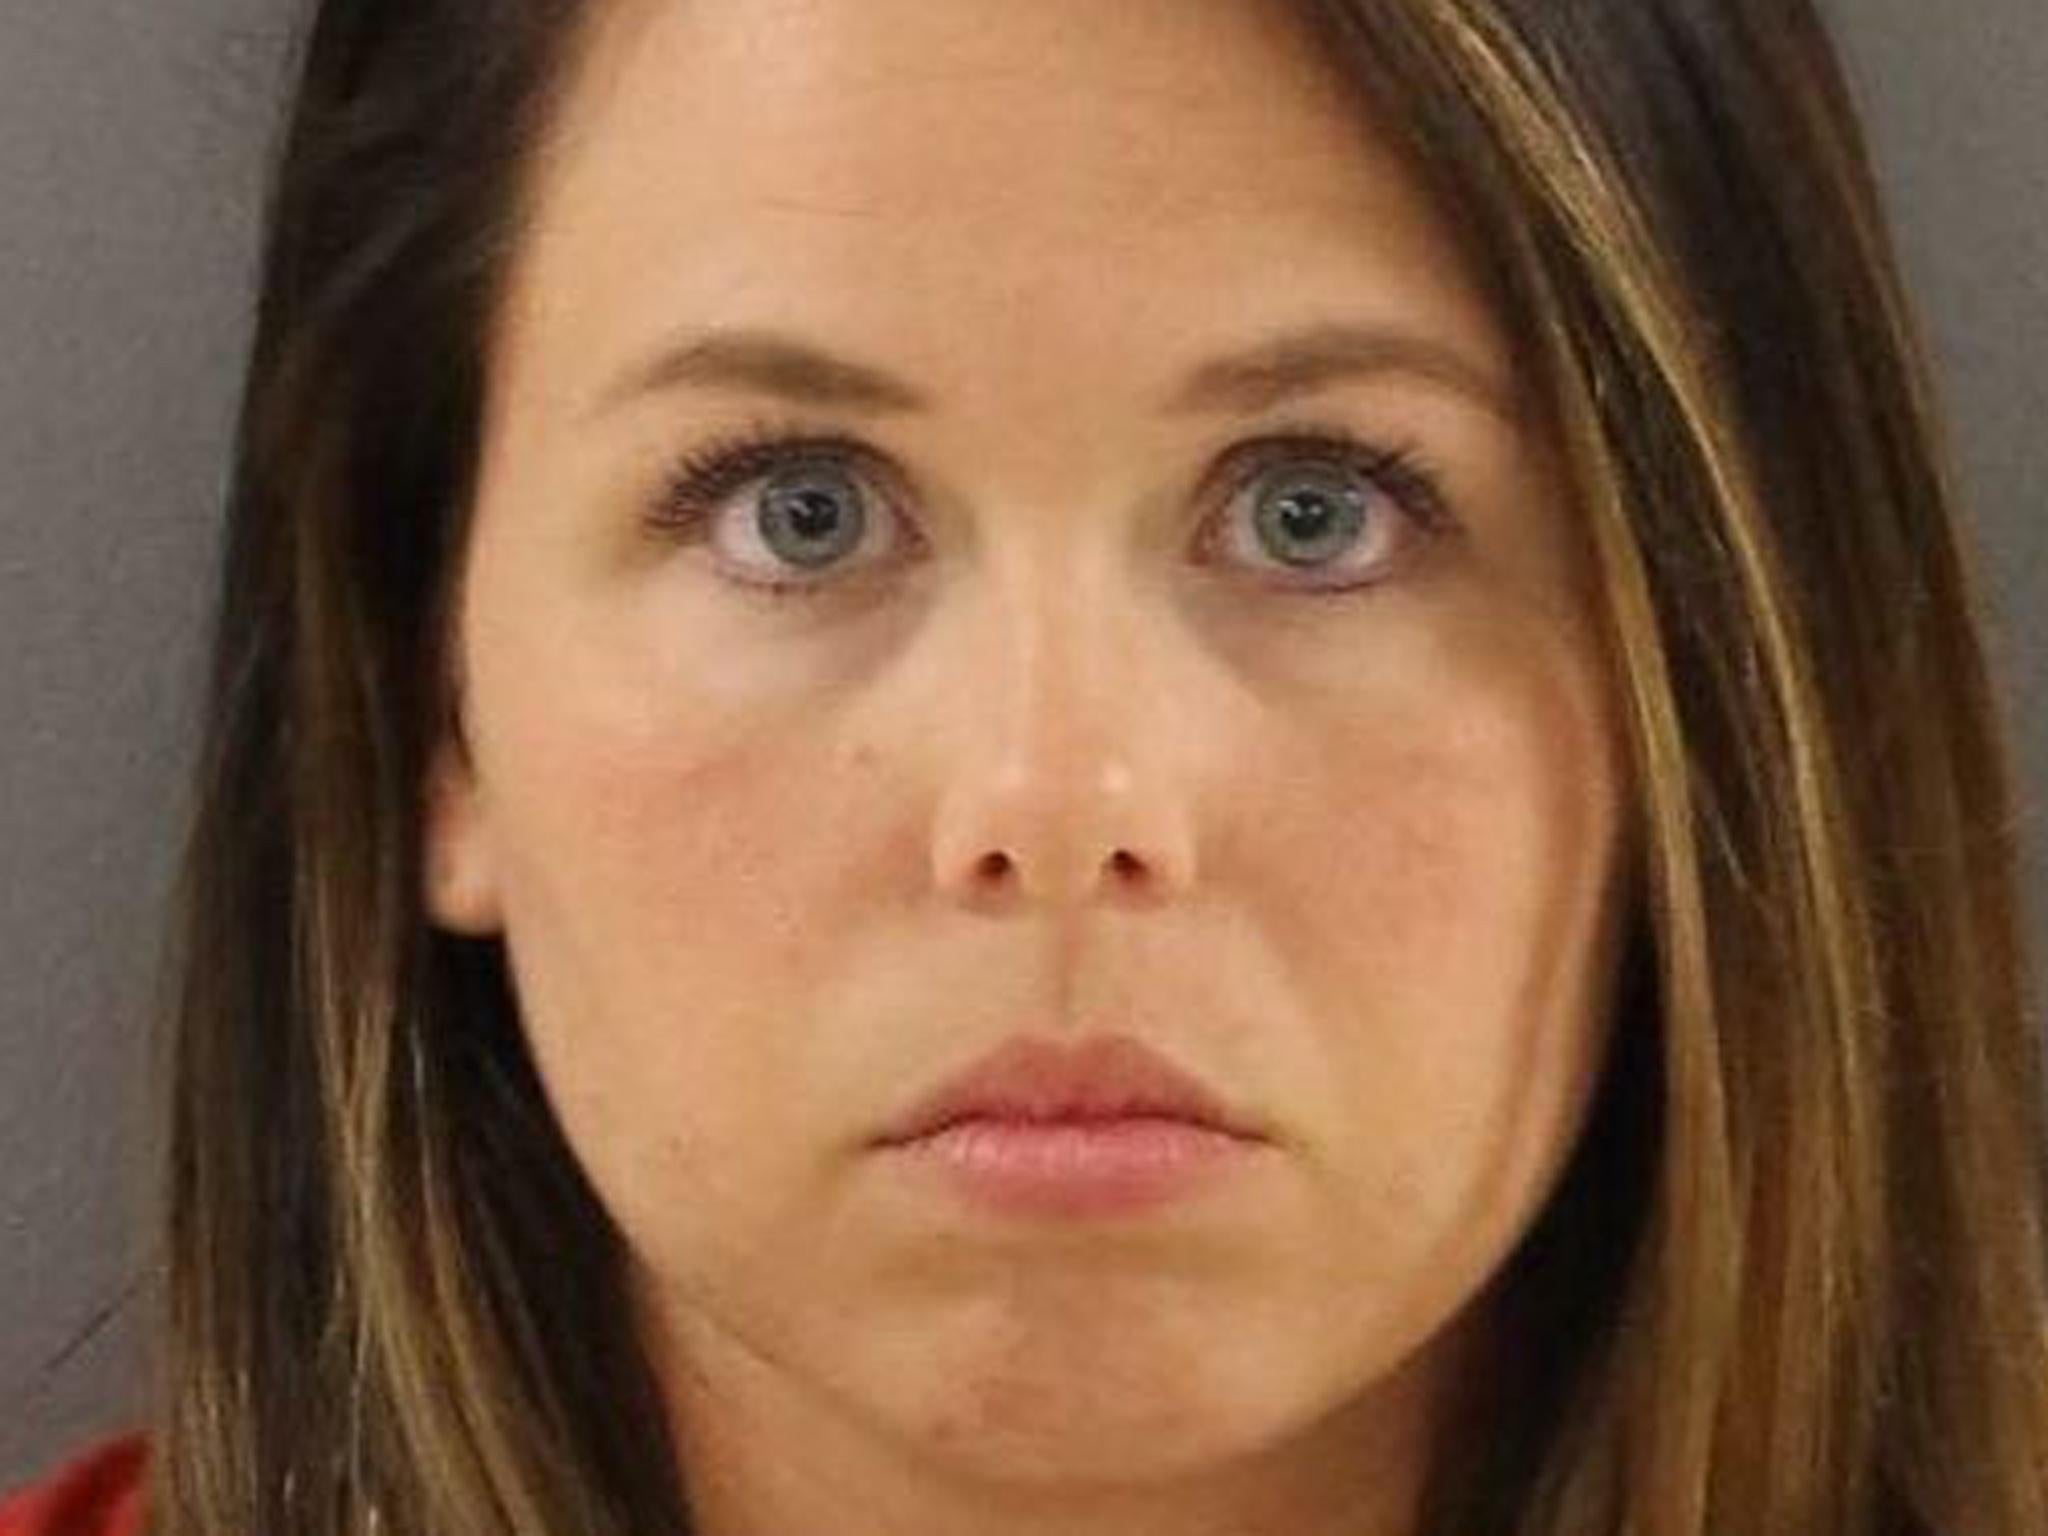 High school football coachs wife pleads guilty to having sex with 16-year-old team member The Independent The Independent